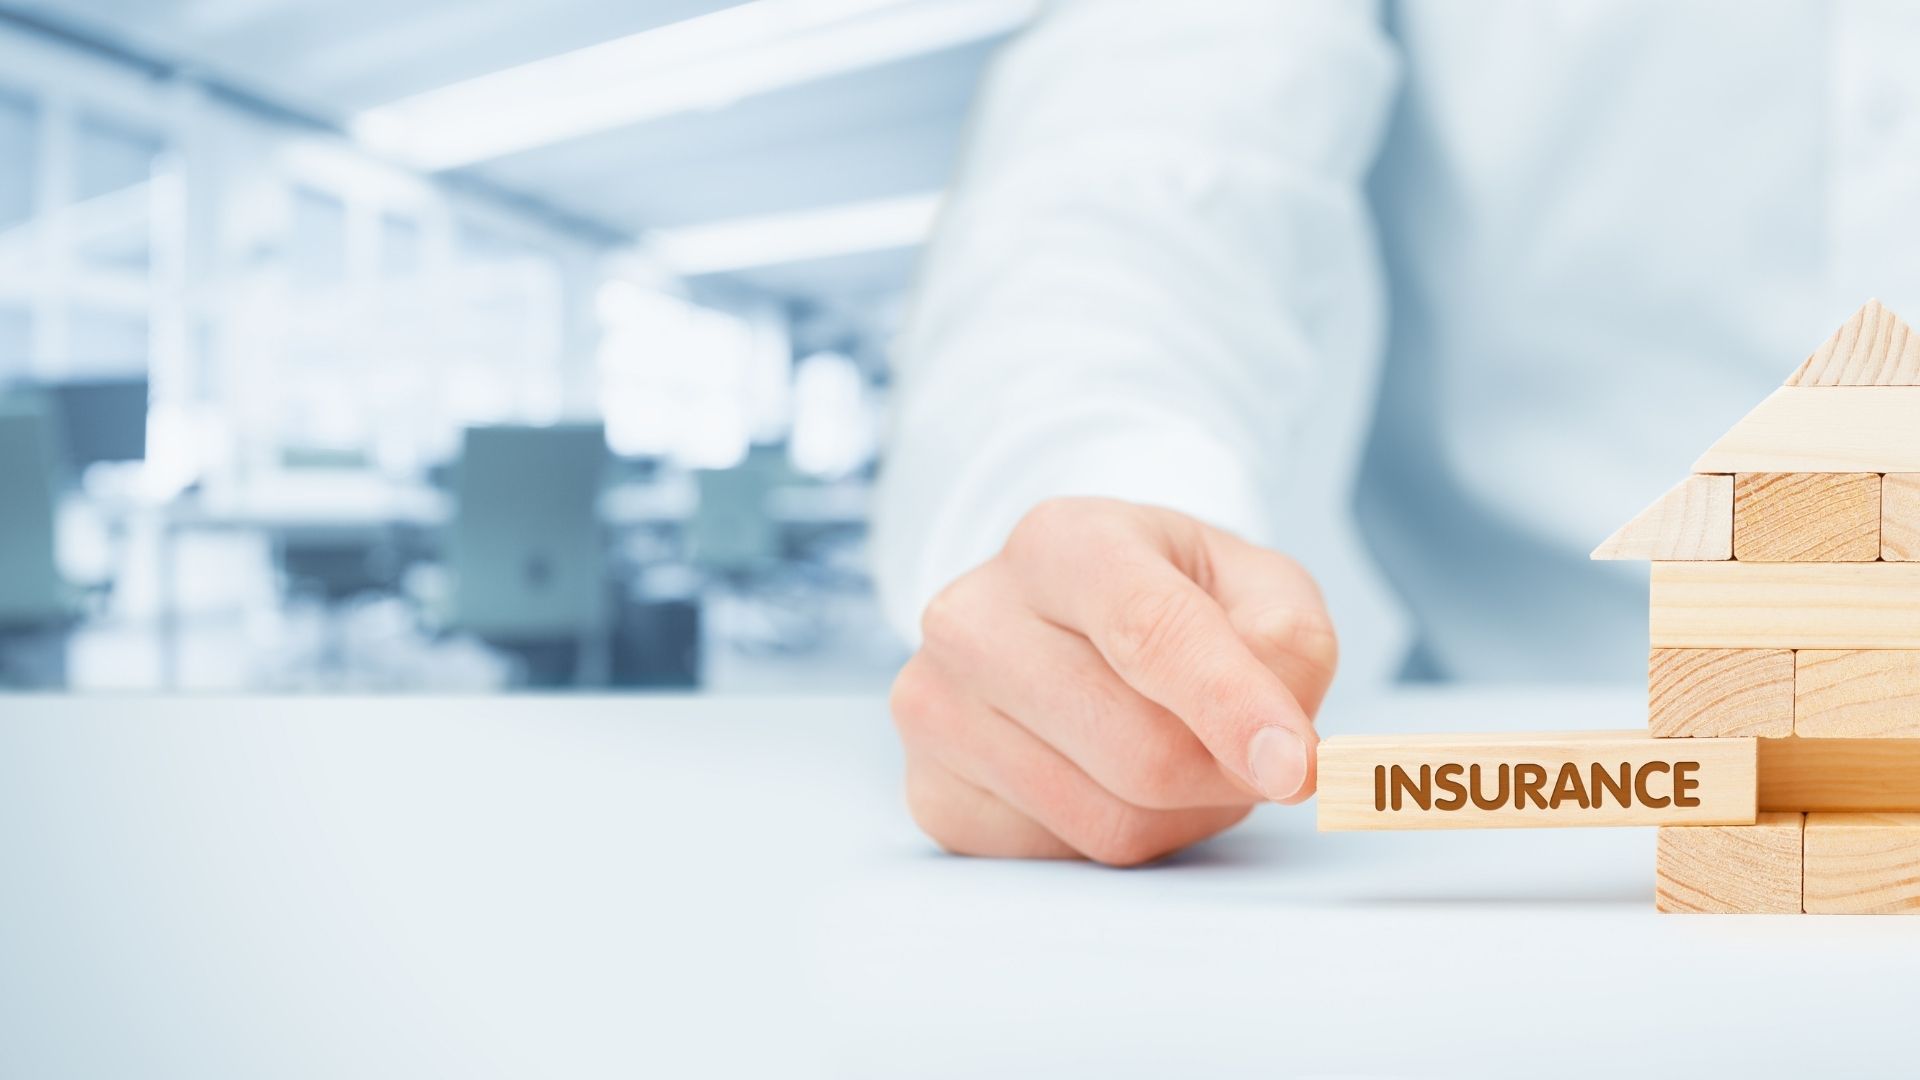 Why You Should Carry More Than the Minimum Liability Insurance for Your Business